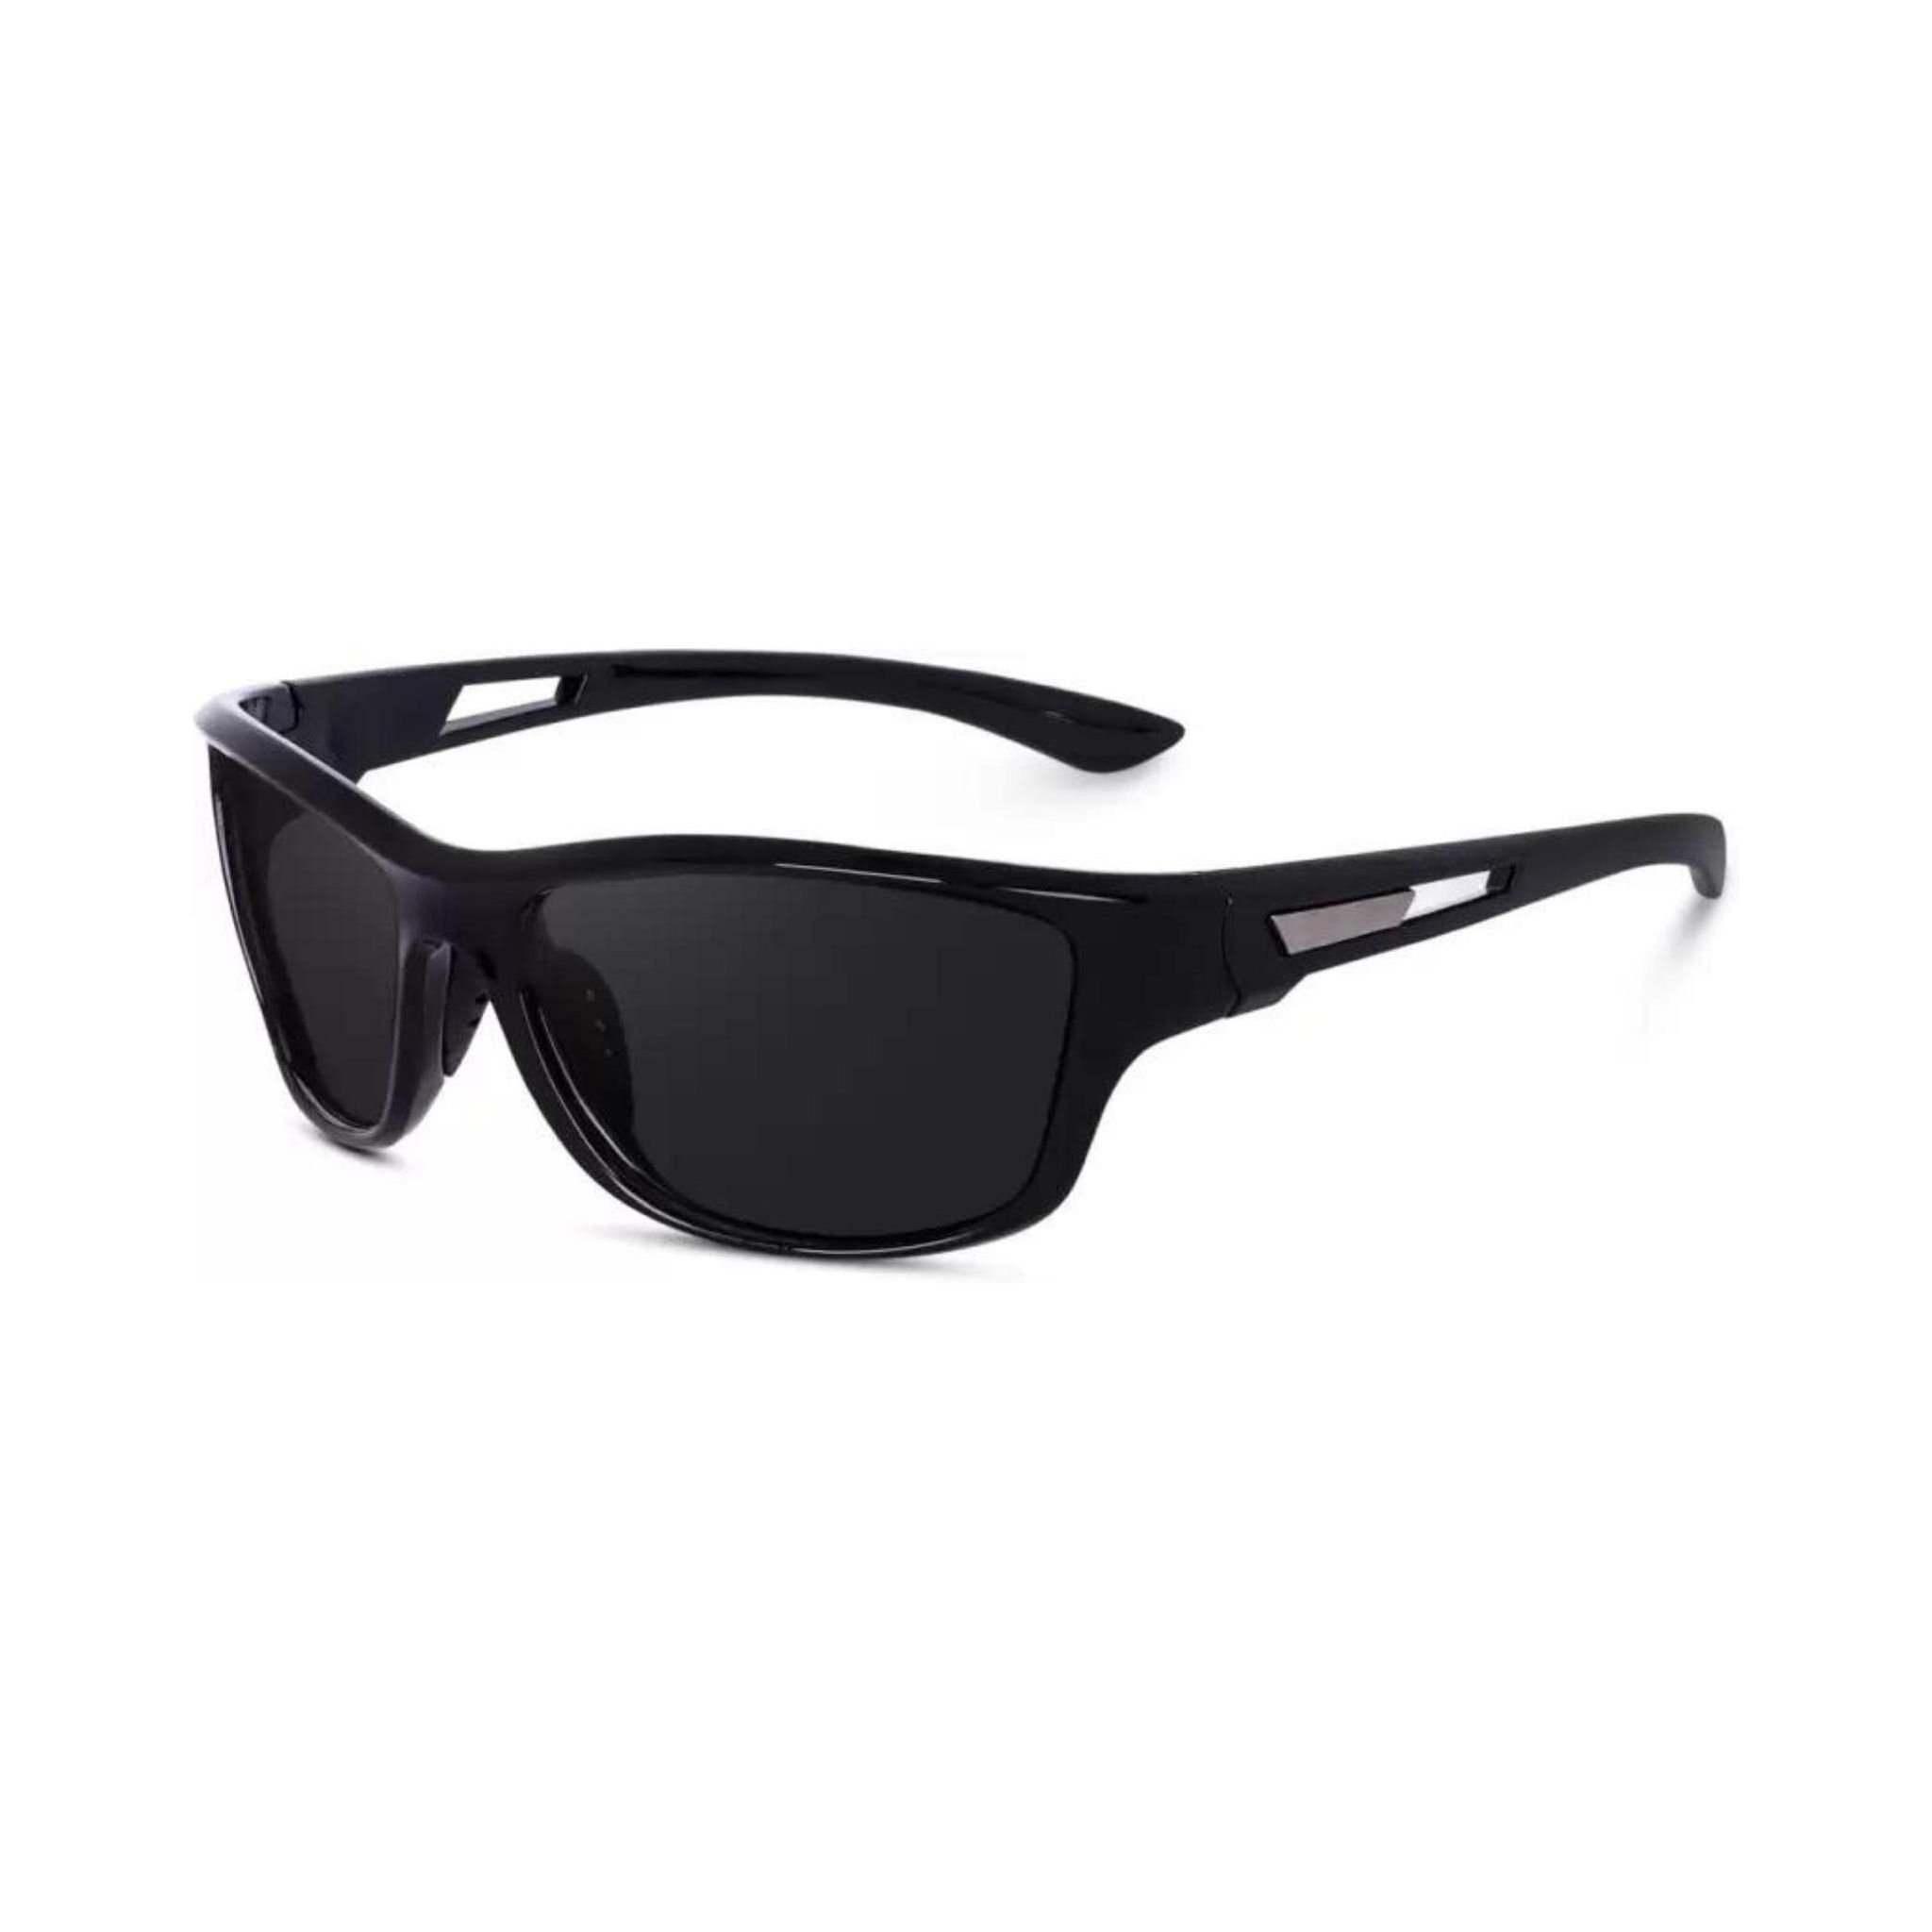 Adidas Sport Sunglasses SP0072 Cmpt Aero Li 24X - Best Price and Available  as Trendy Shades